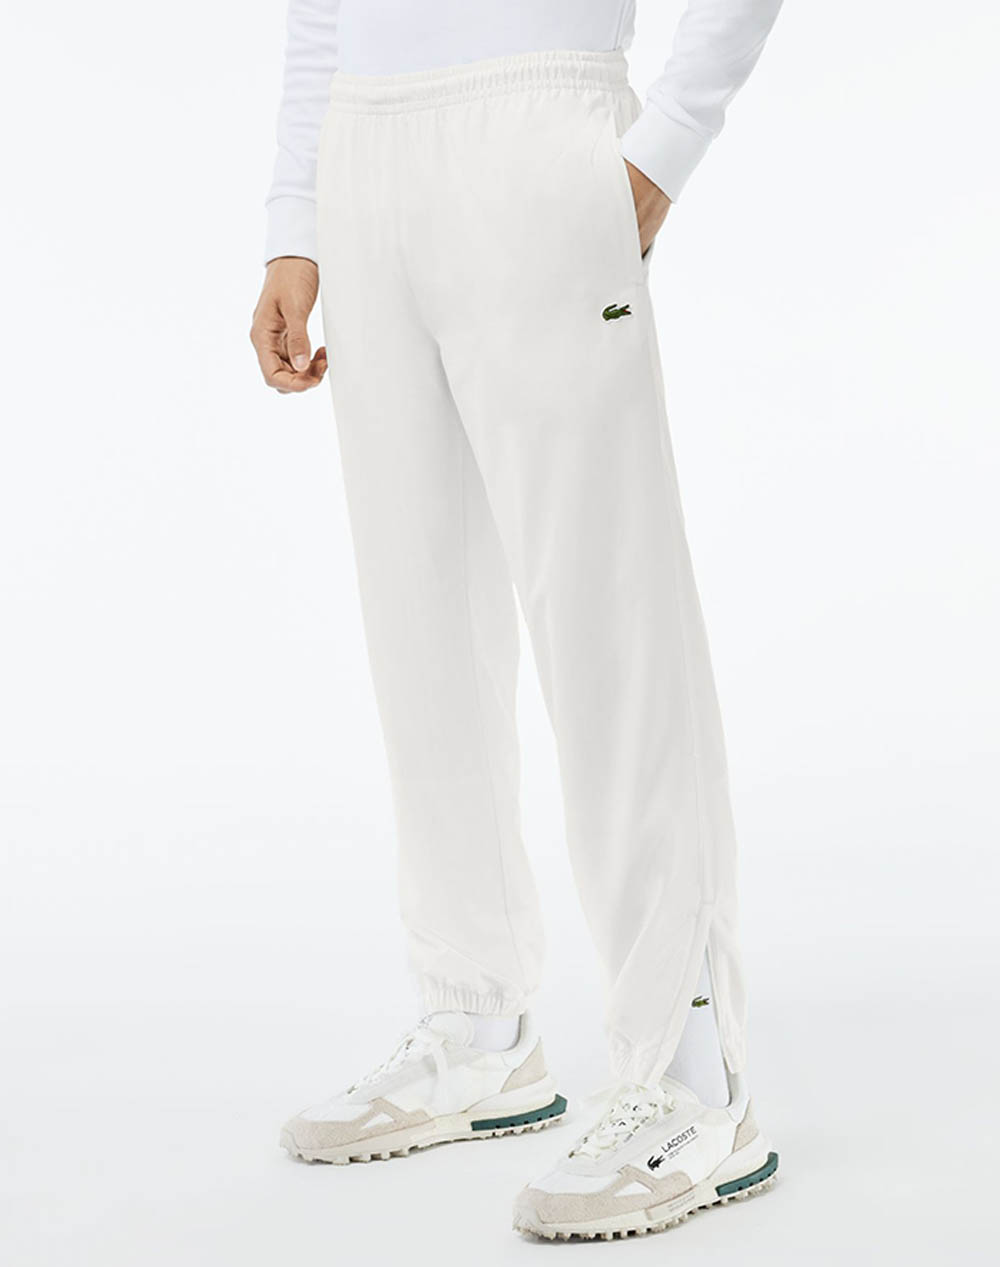 smeltet syre Lave om LACOSTE TRACKSUIT TROUSERS - OffWhite | Politikos-shop.gr